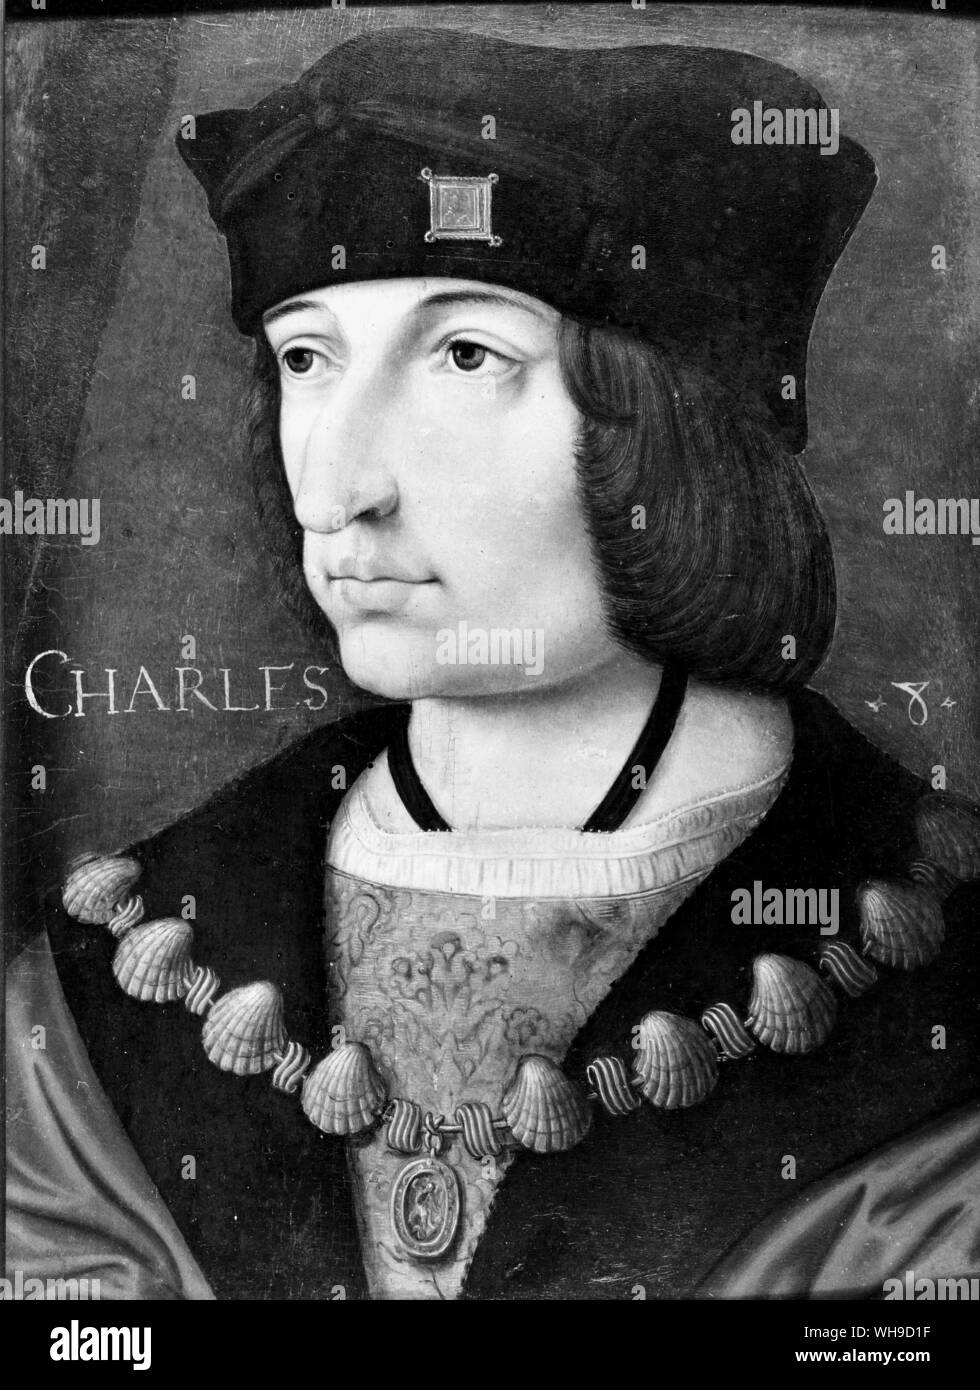 King Charles Viii Of France 1470 1498 King From 1483 When He Succeeded His Father Louis Xi